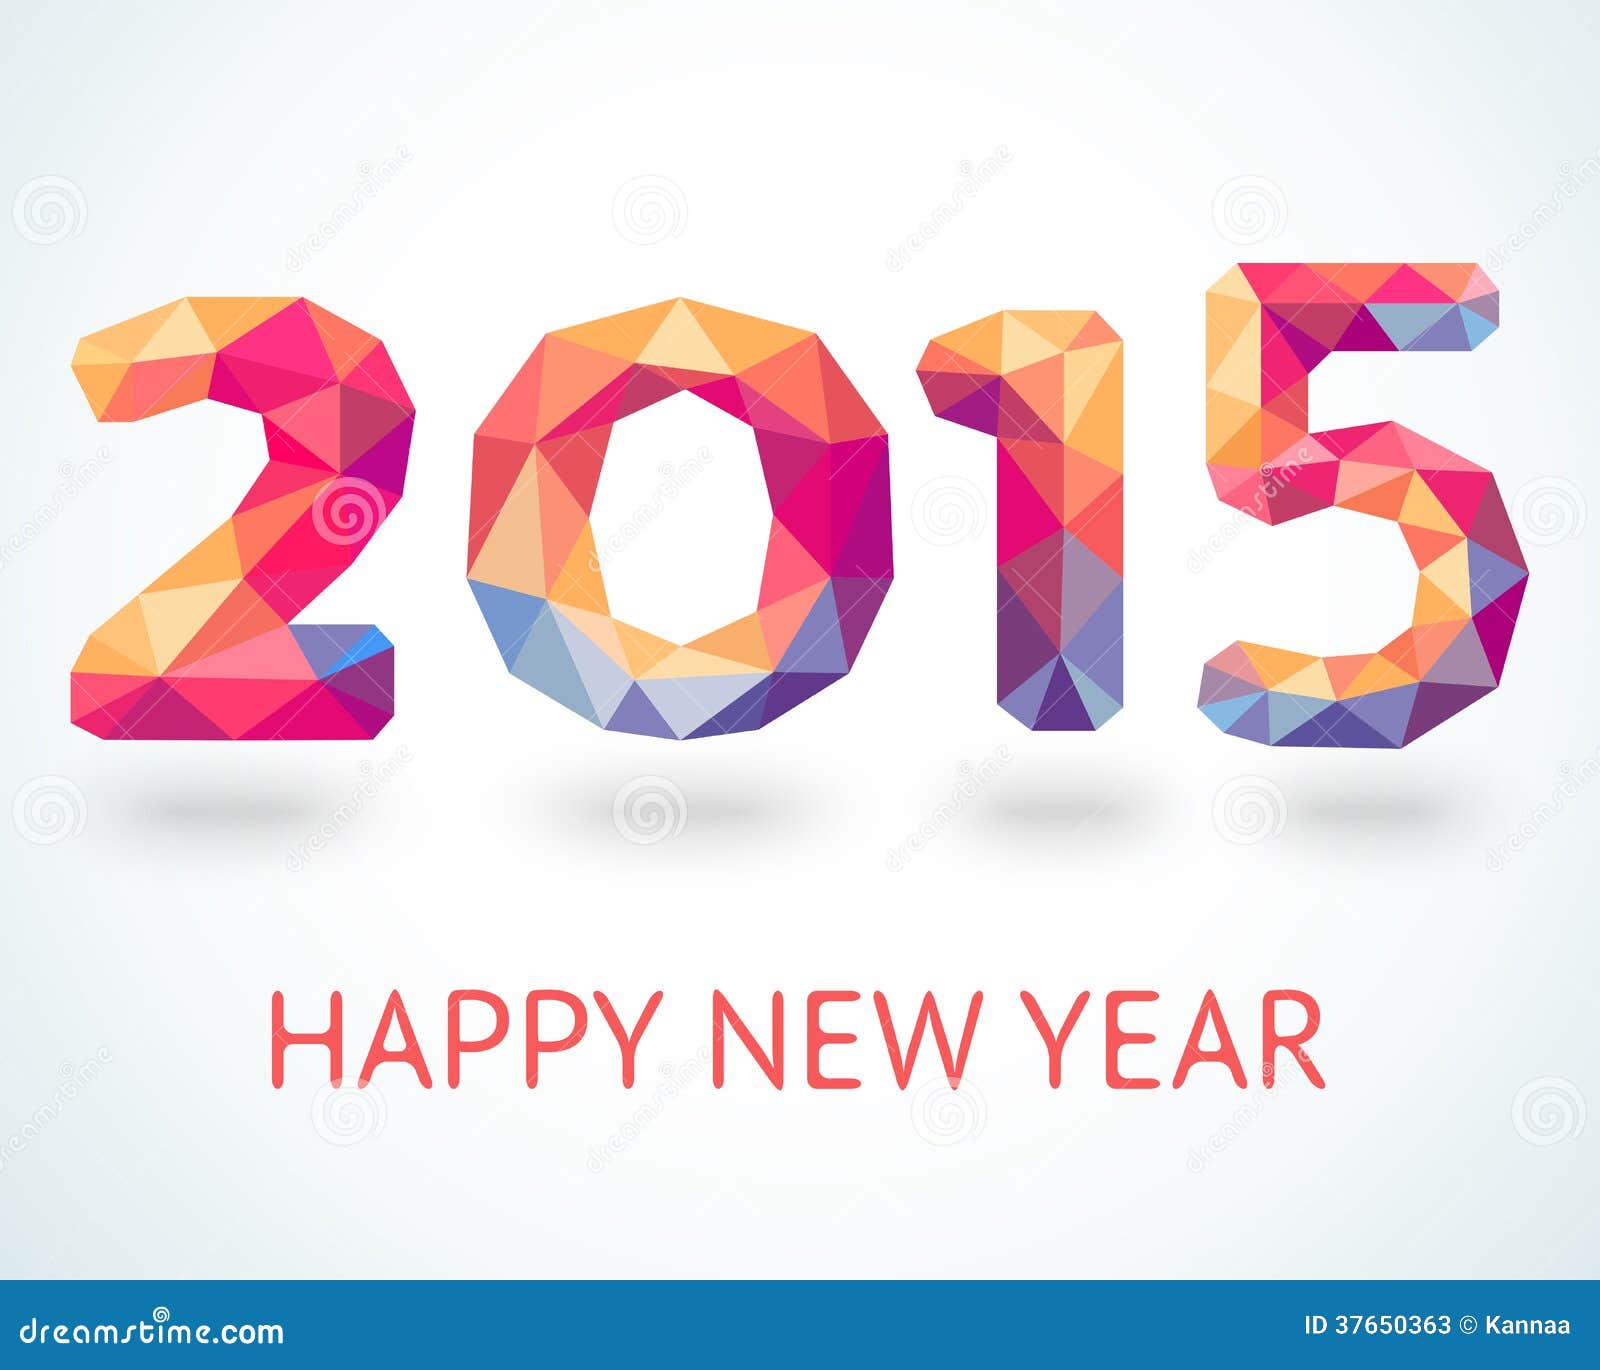 new year's day 2015 clipart - photo #8